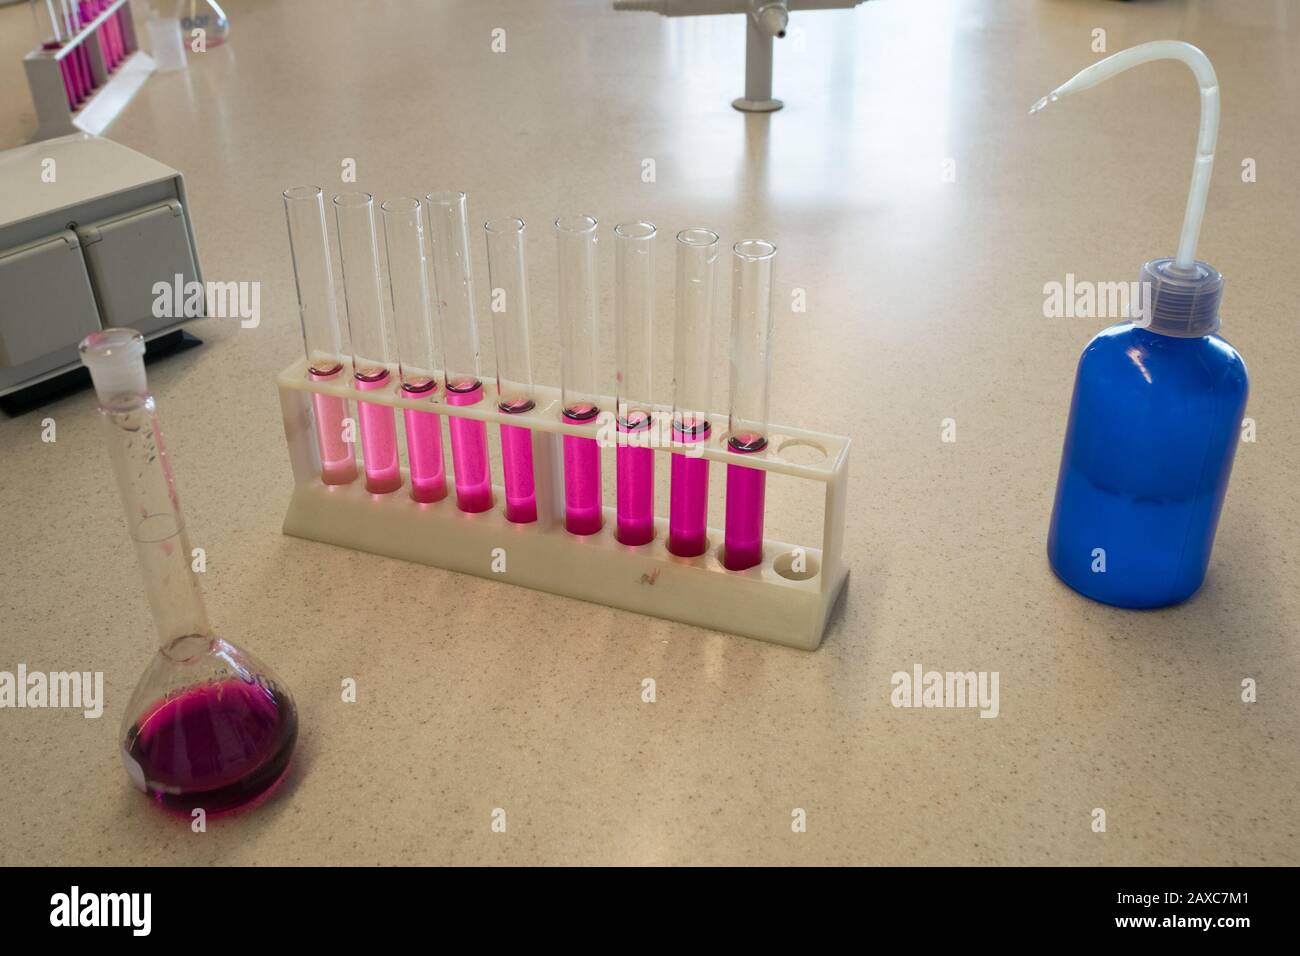 Serial dilution